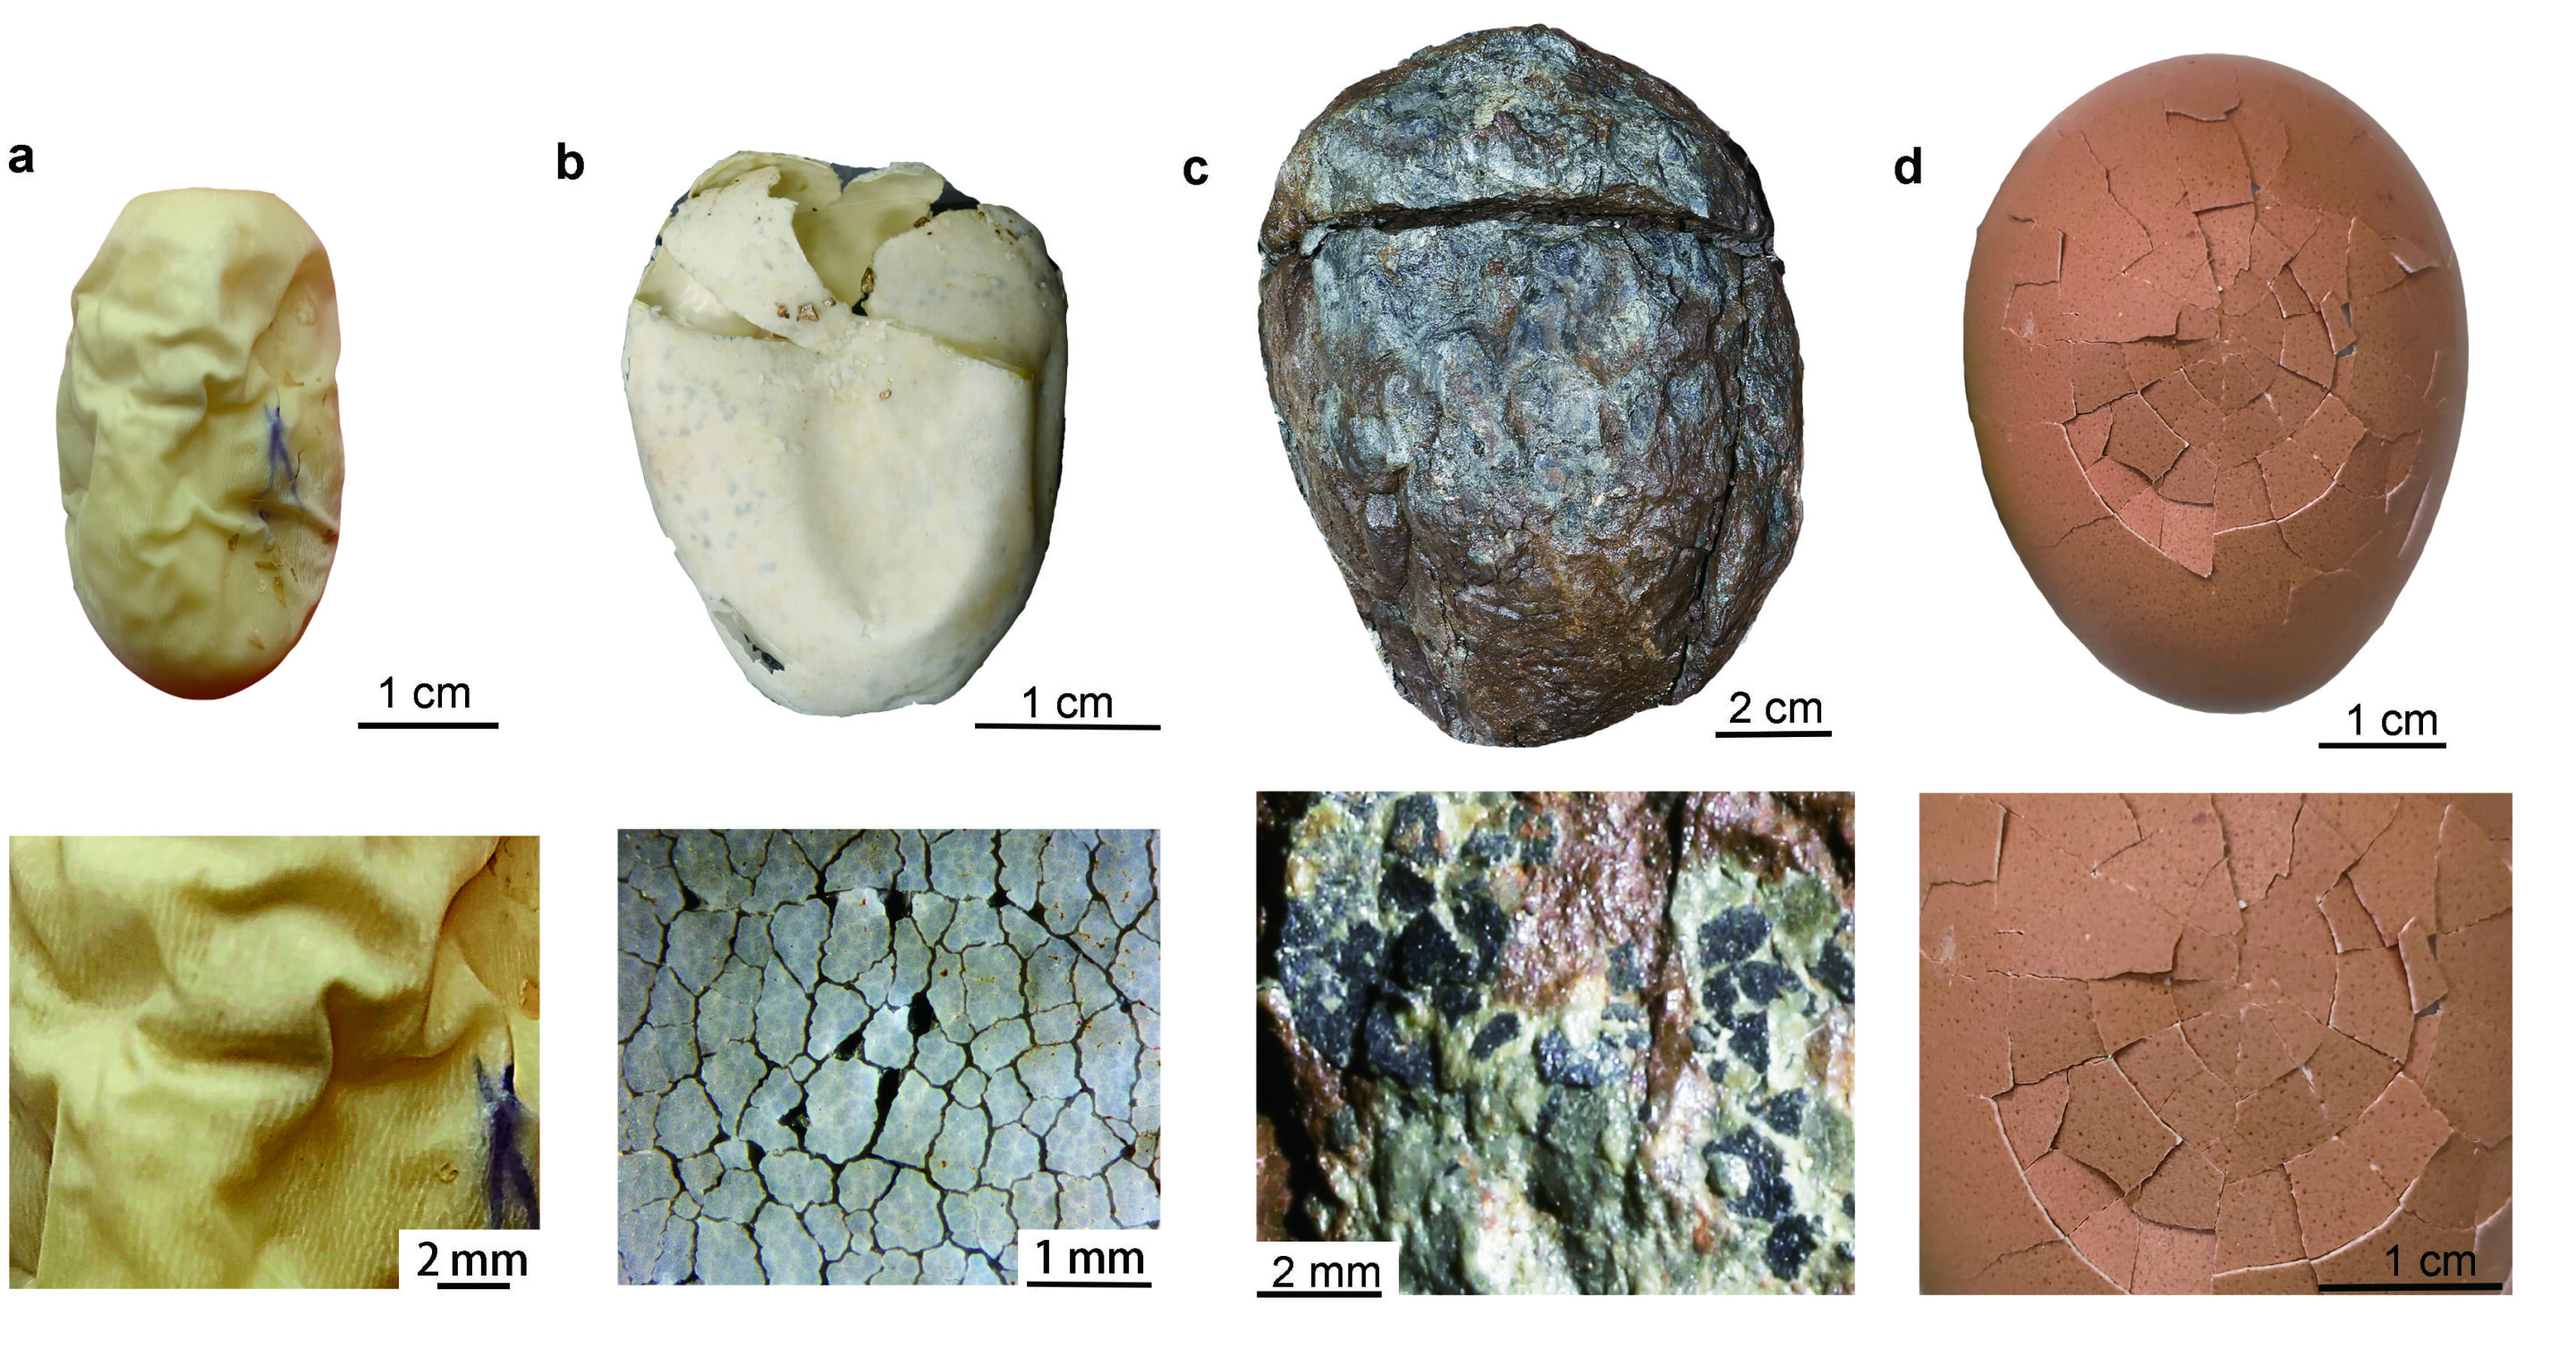 The first dinosaur egg was leathery